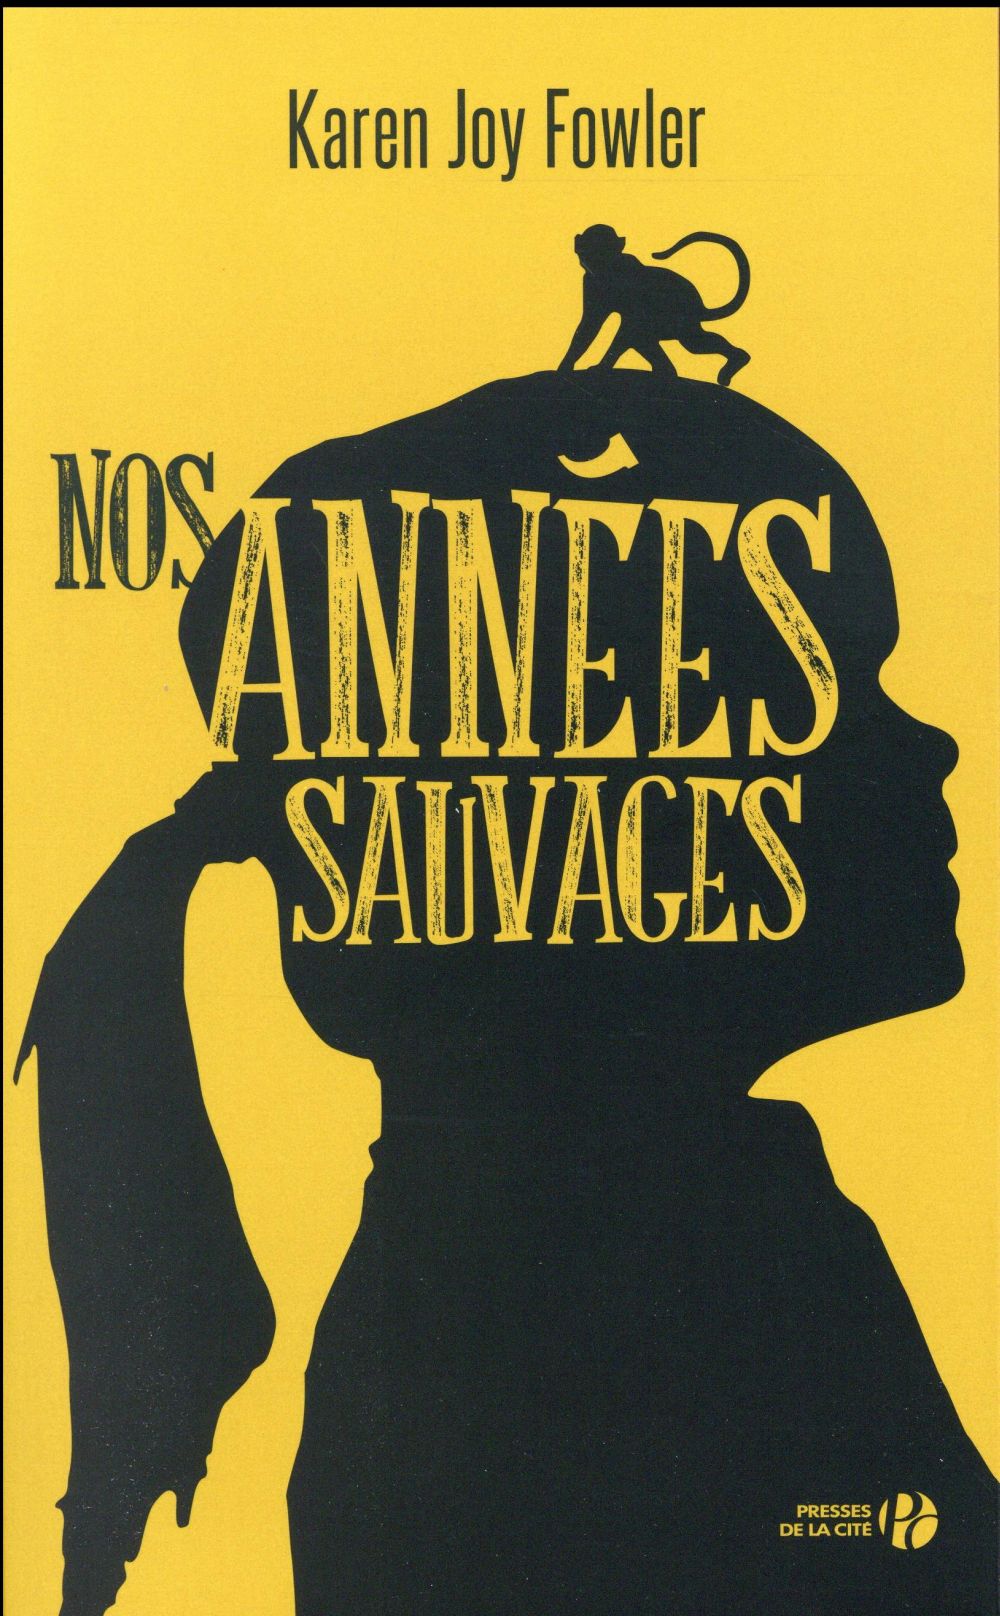 NOS ANNEES SAUVAGES